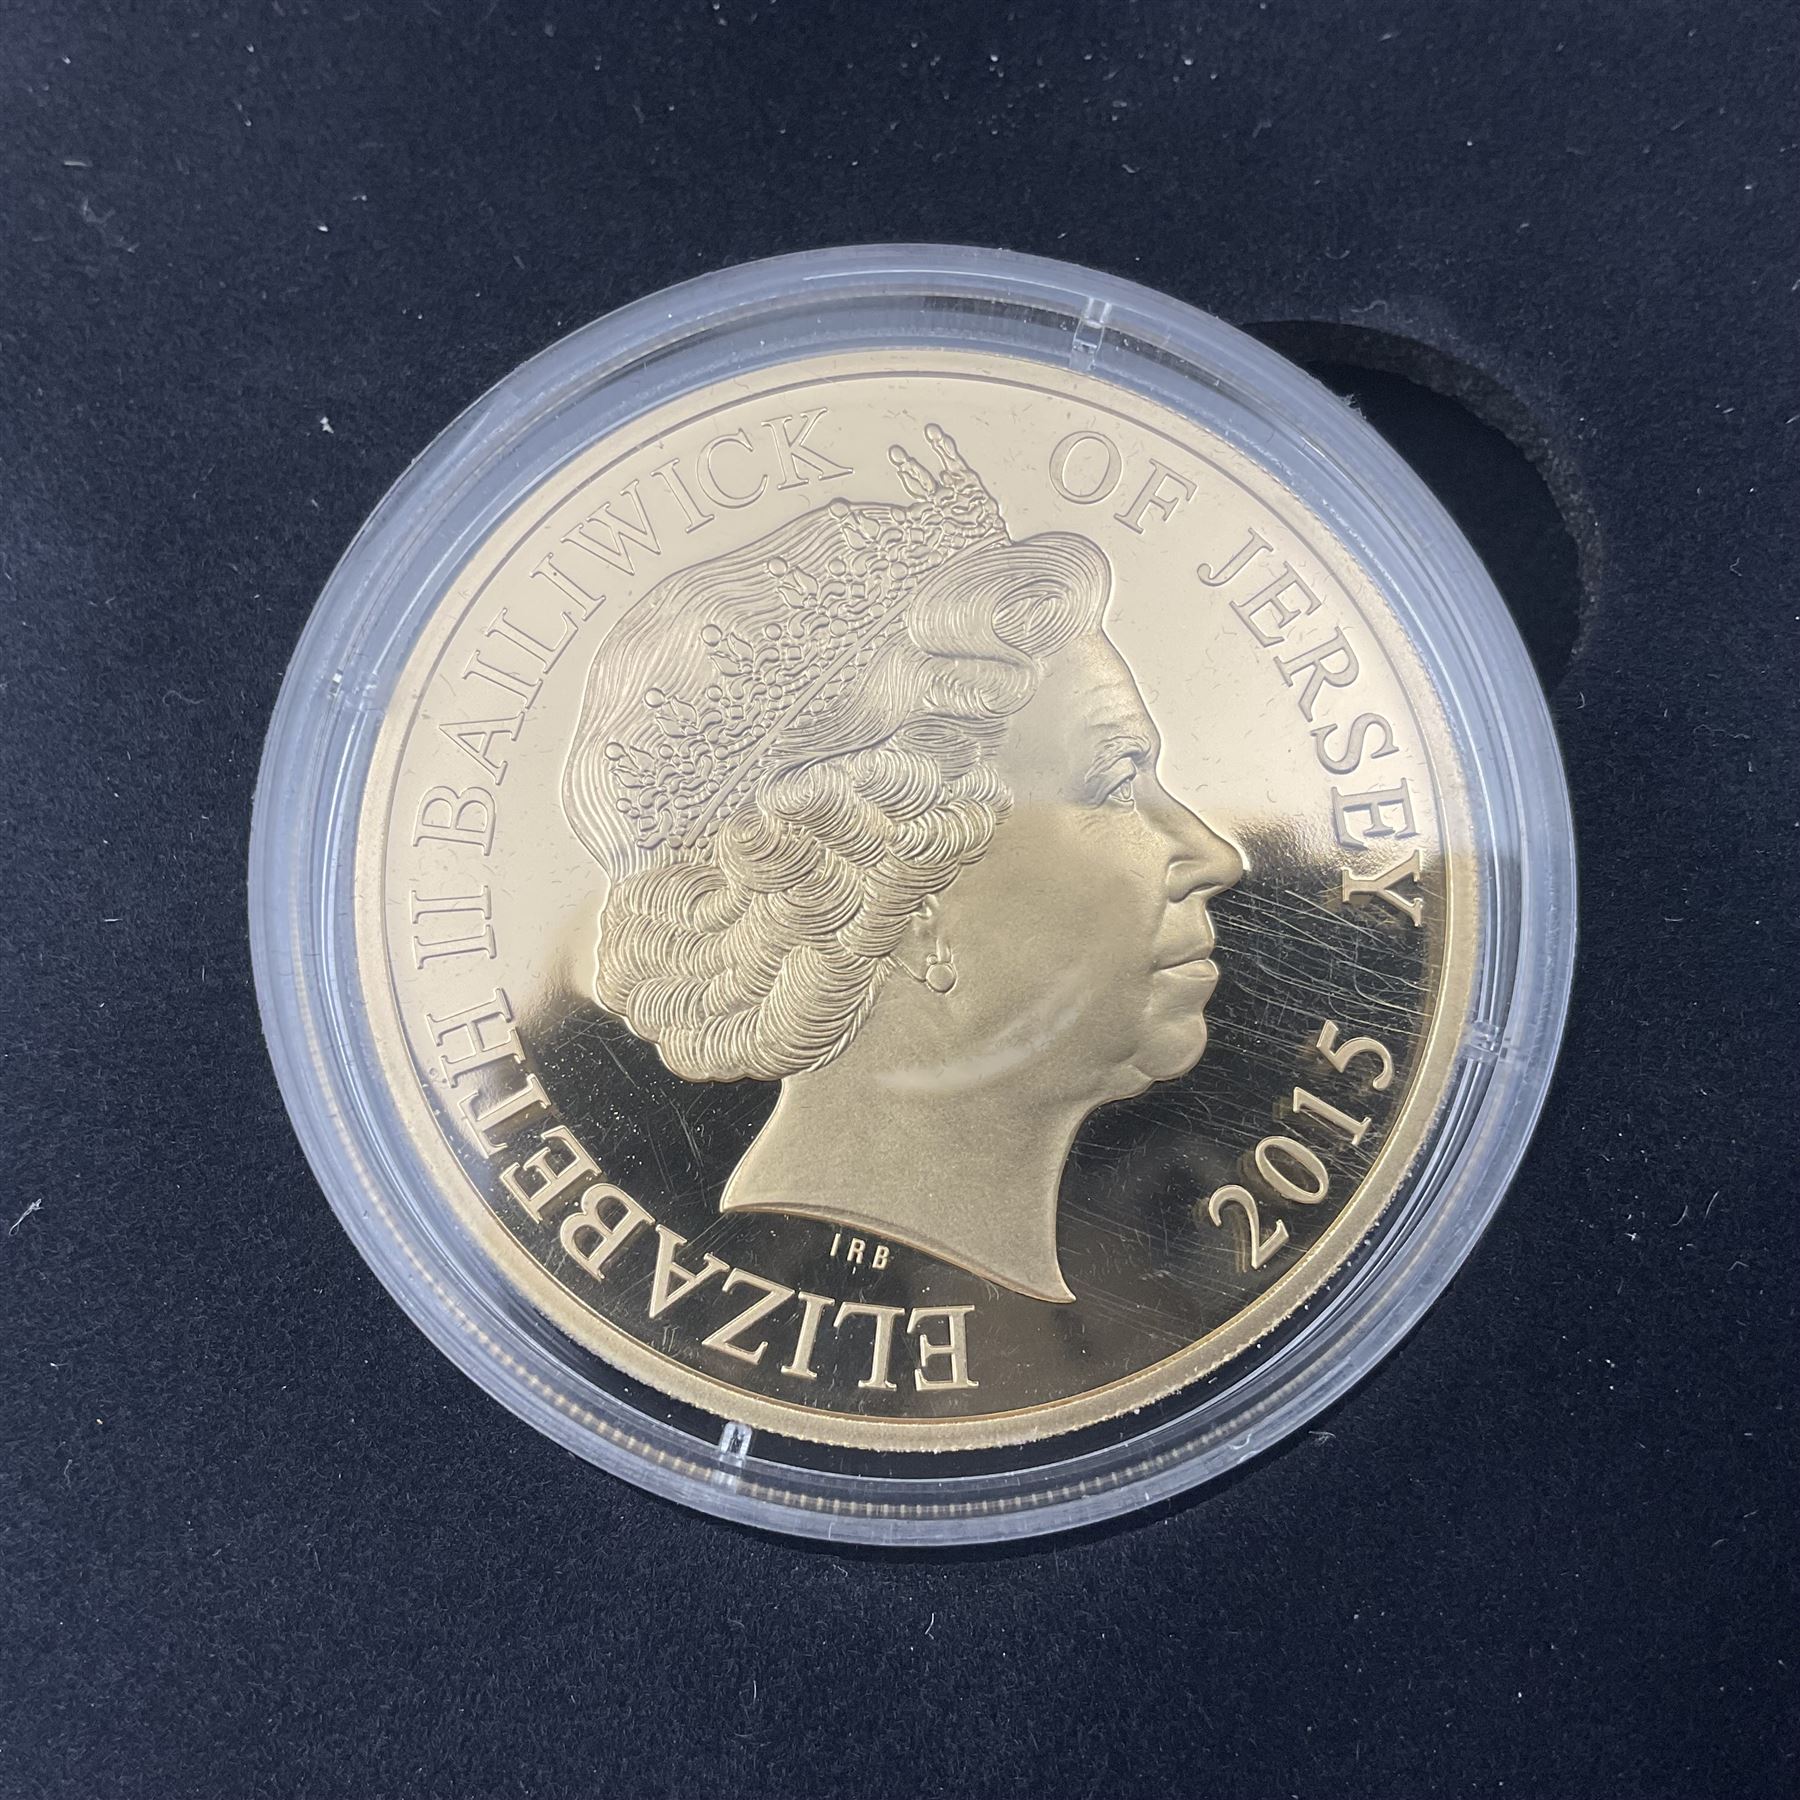 Queen Elizabeth II Bailiwick of Jersey 2015 'Sir Winston Churchill' gold proof five pound coin - Image 3 of 6